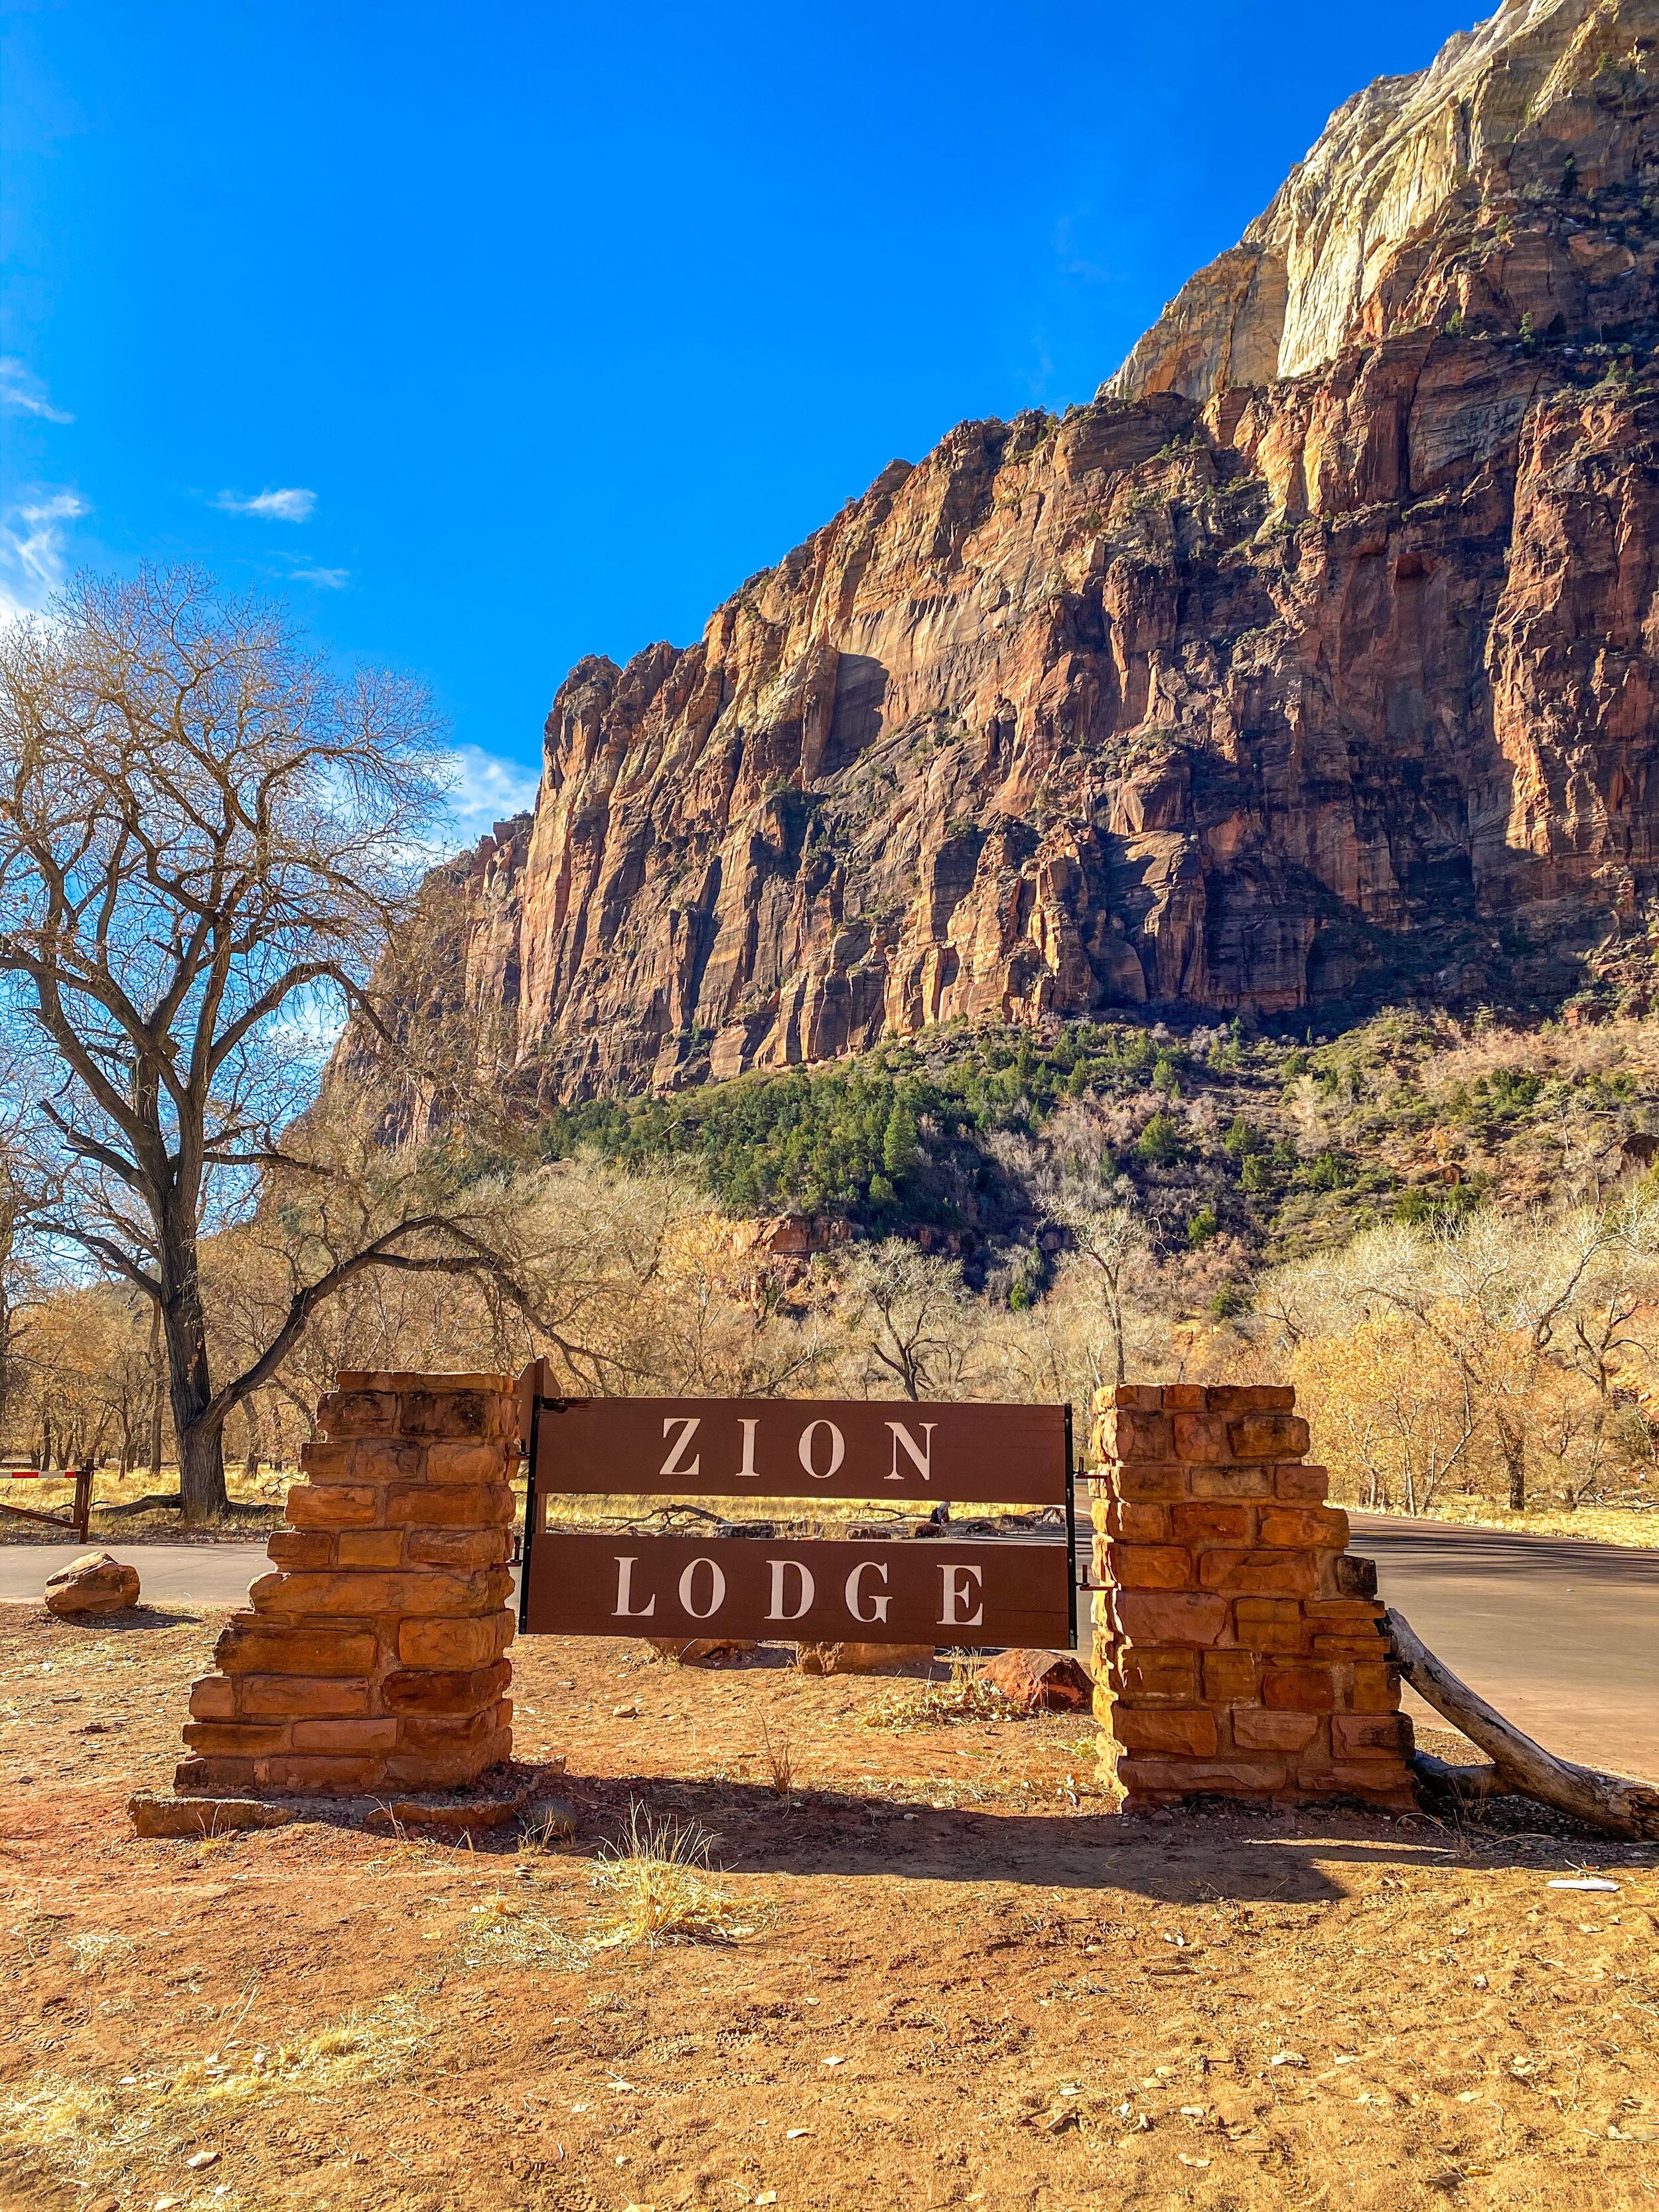 We chose zion lodge because we are guaranteed parking and have direct access to trail heads